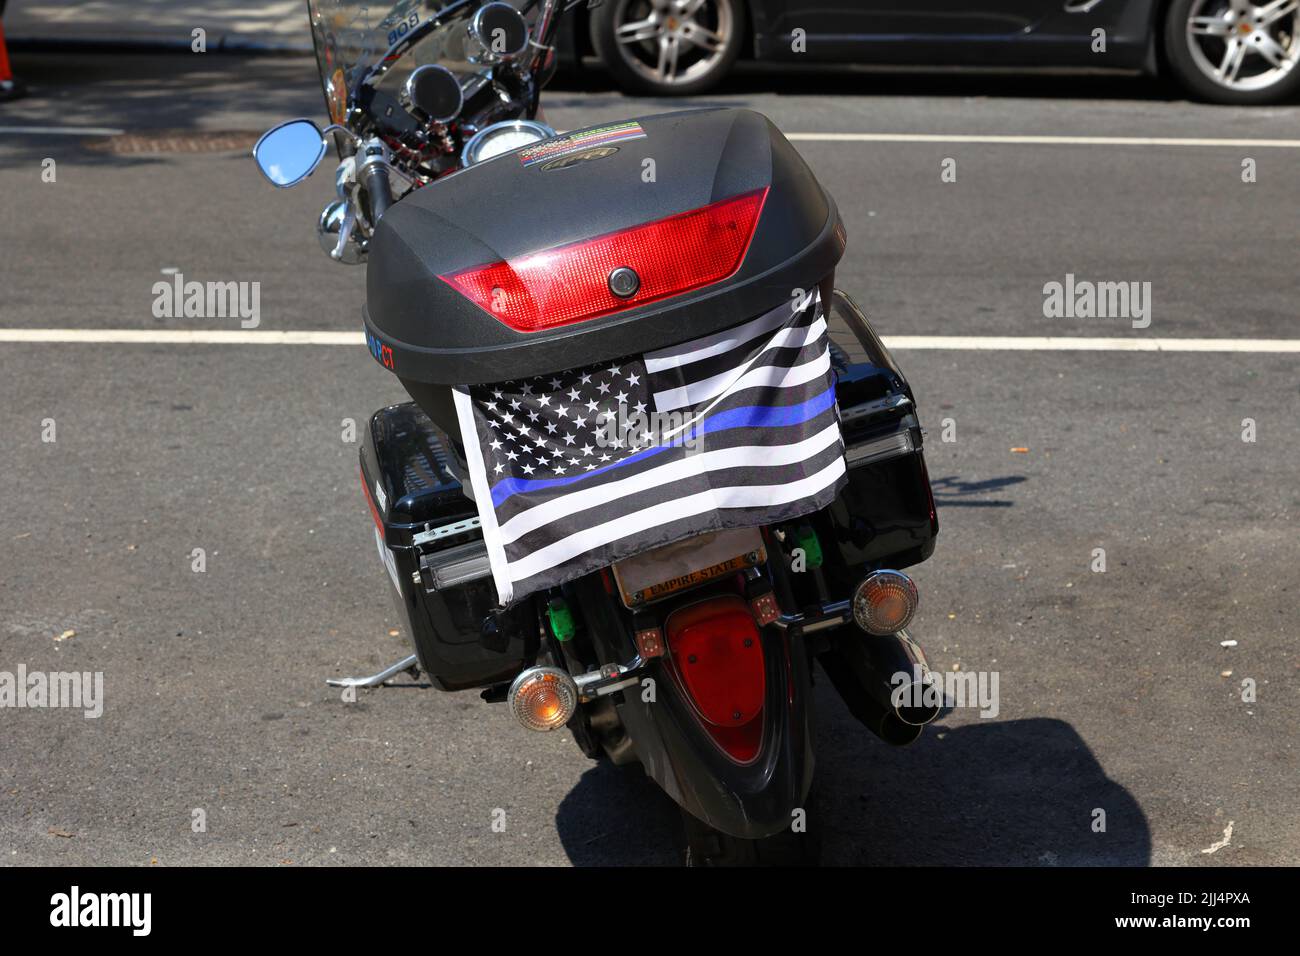 A Thin Blue Line 'Blue Lives Matter' flag on a motorcycle with an obstructed, obscured license plate. New York, July 20, 2022. Stock Photo